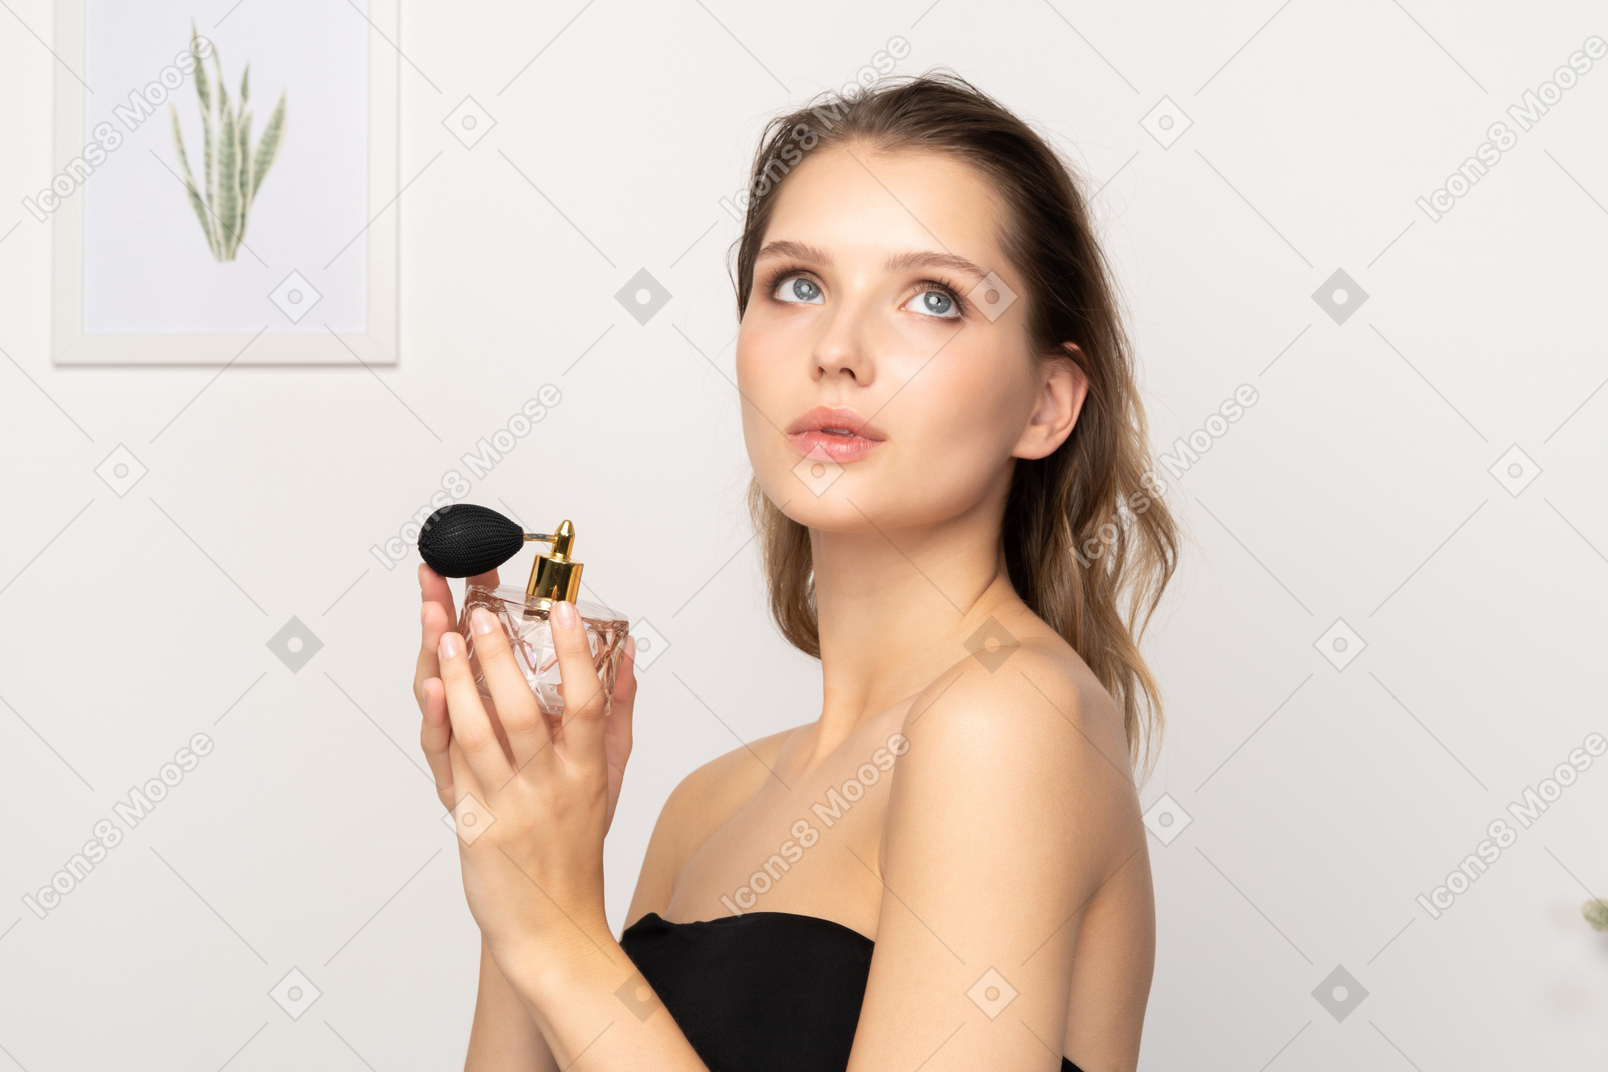 Three-quarter view of a sensual young woman holding a bottle of perfume